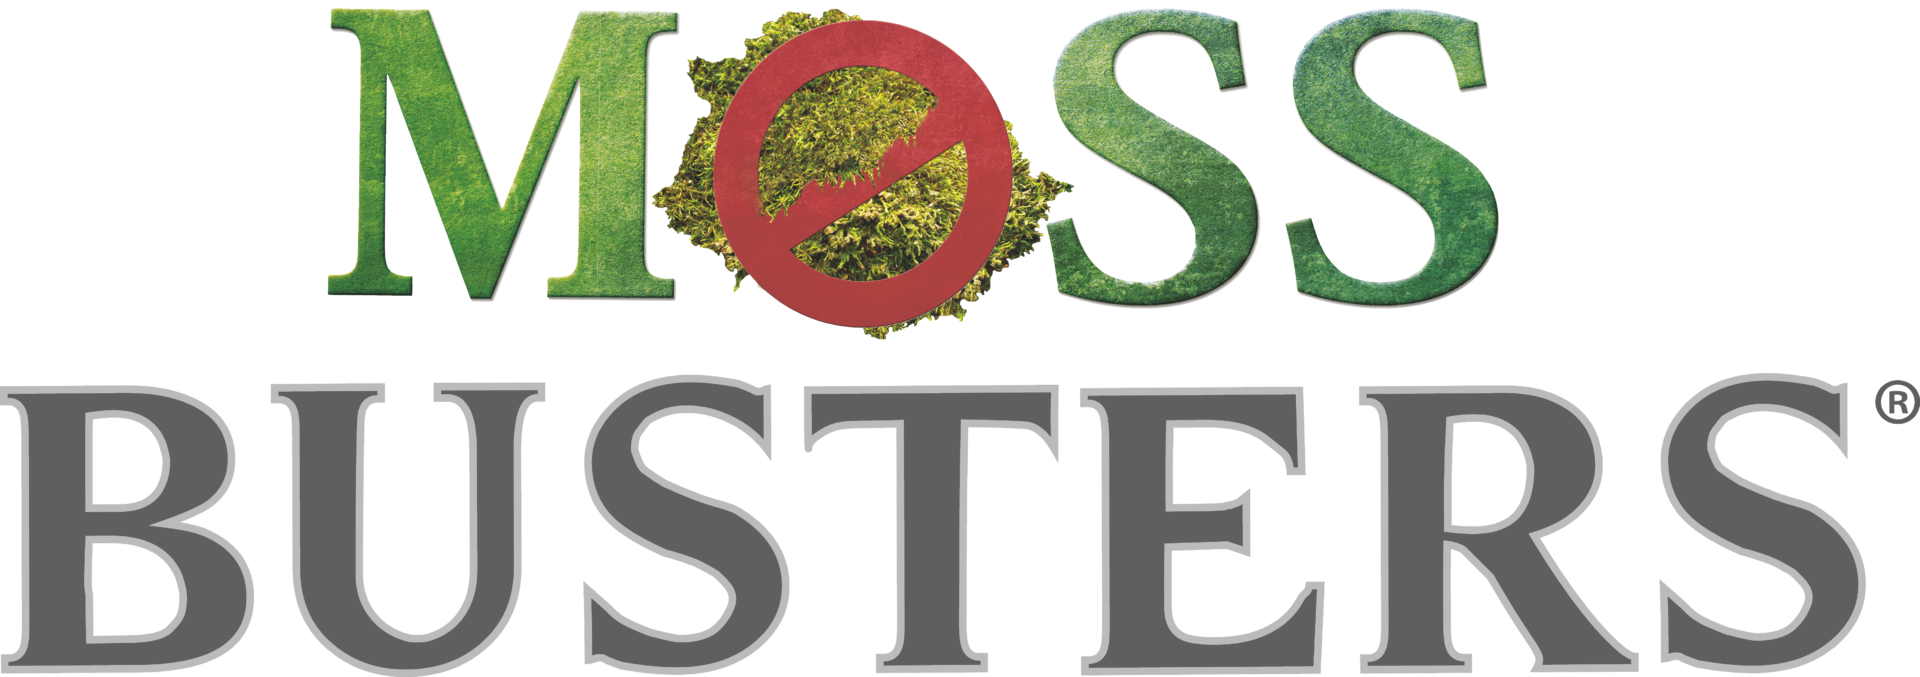 Moss Busters Logo